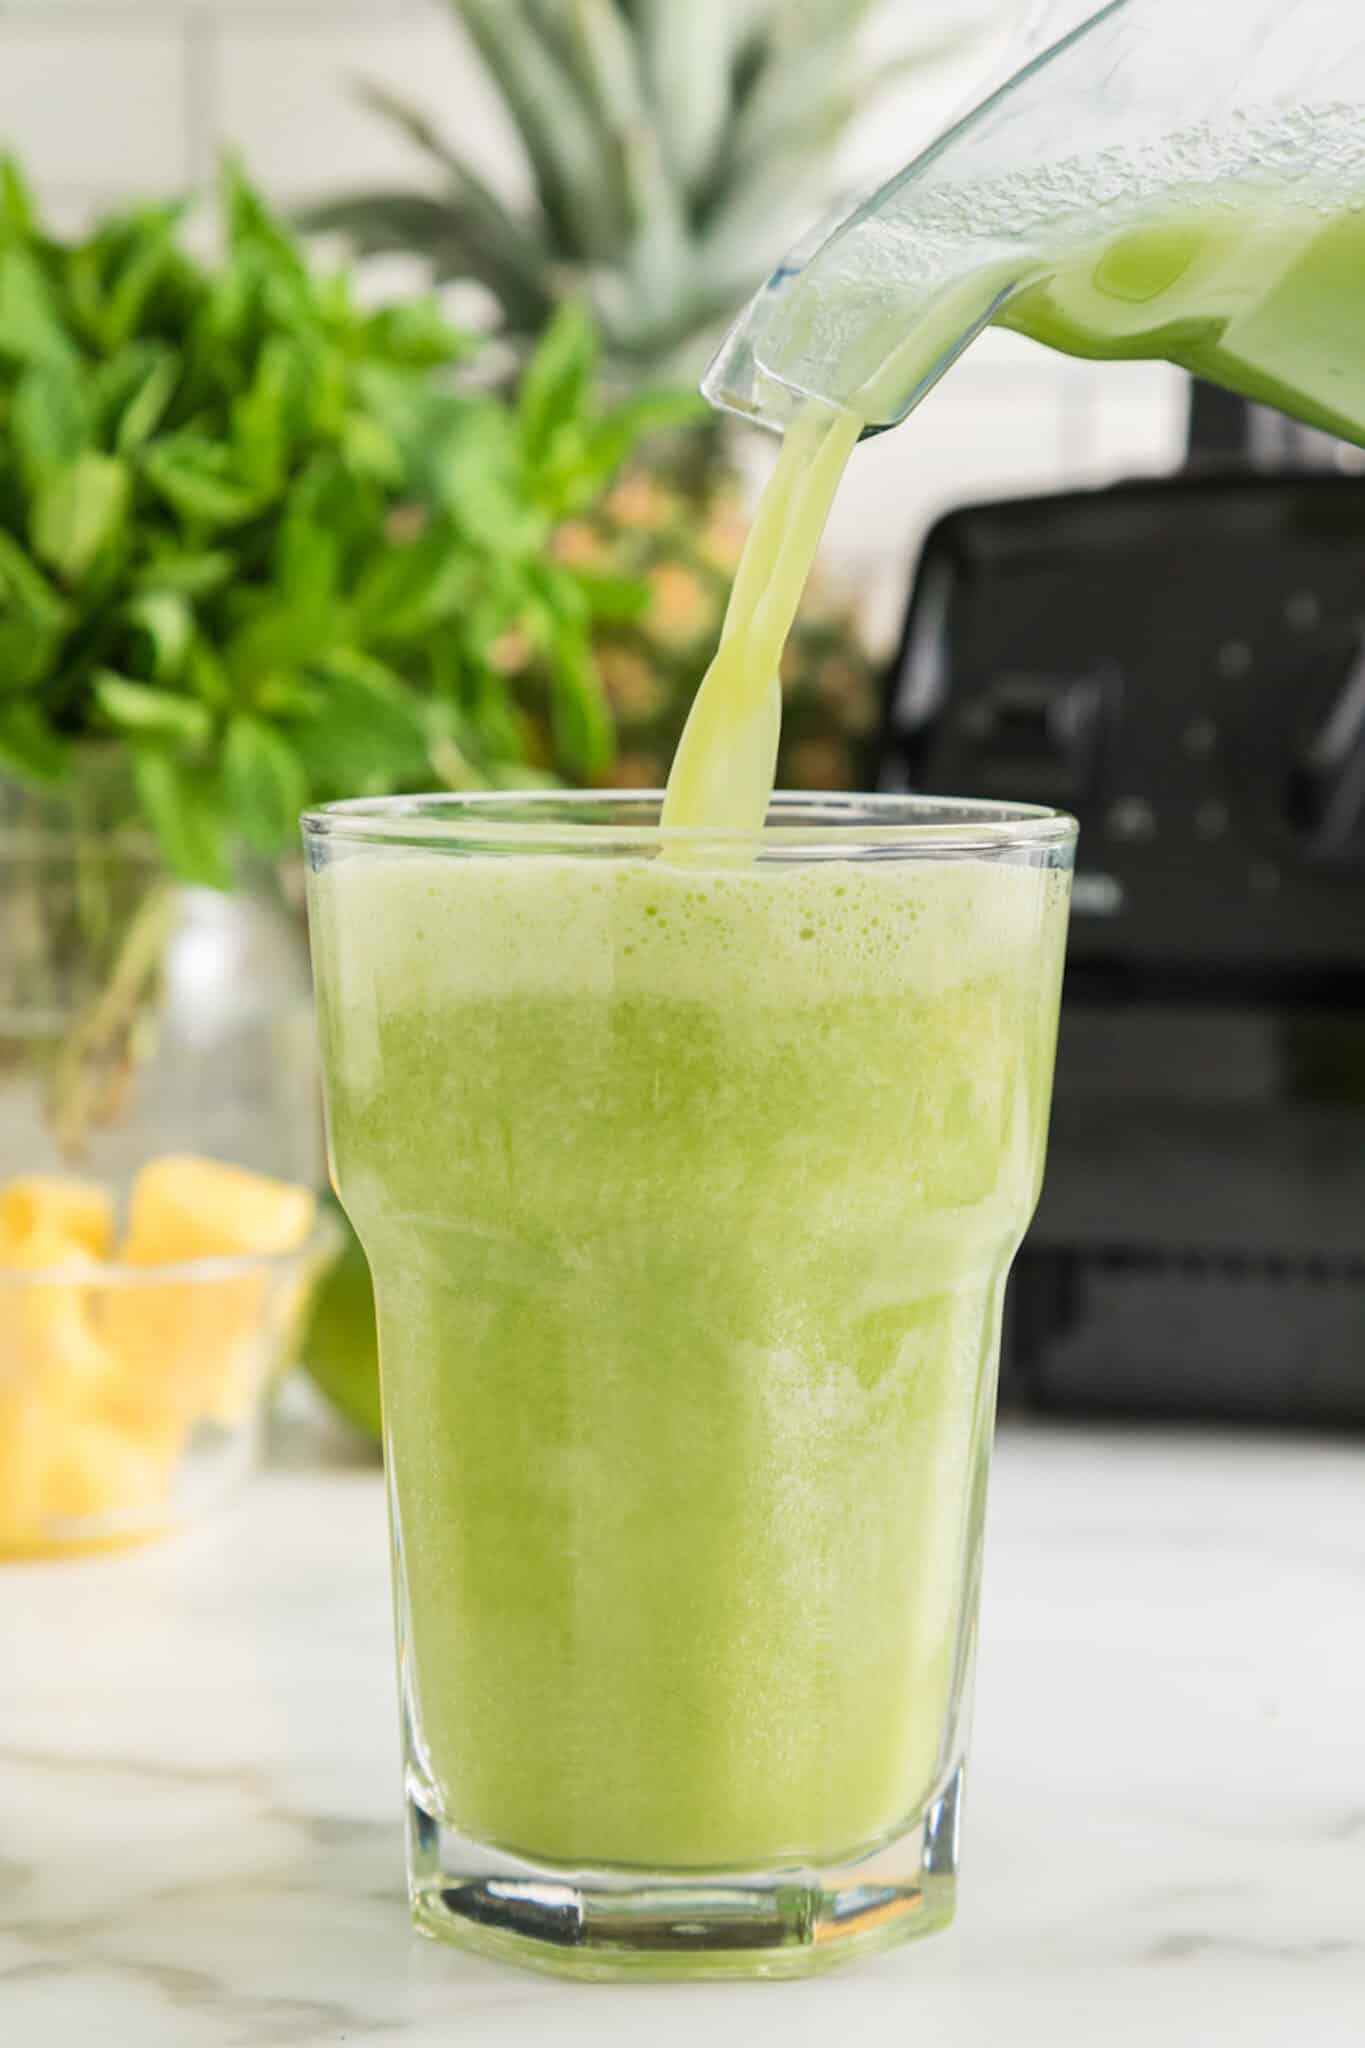 A blender pouring pineapple cucumber smoothie into a glass.